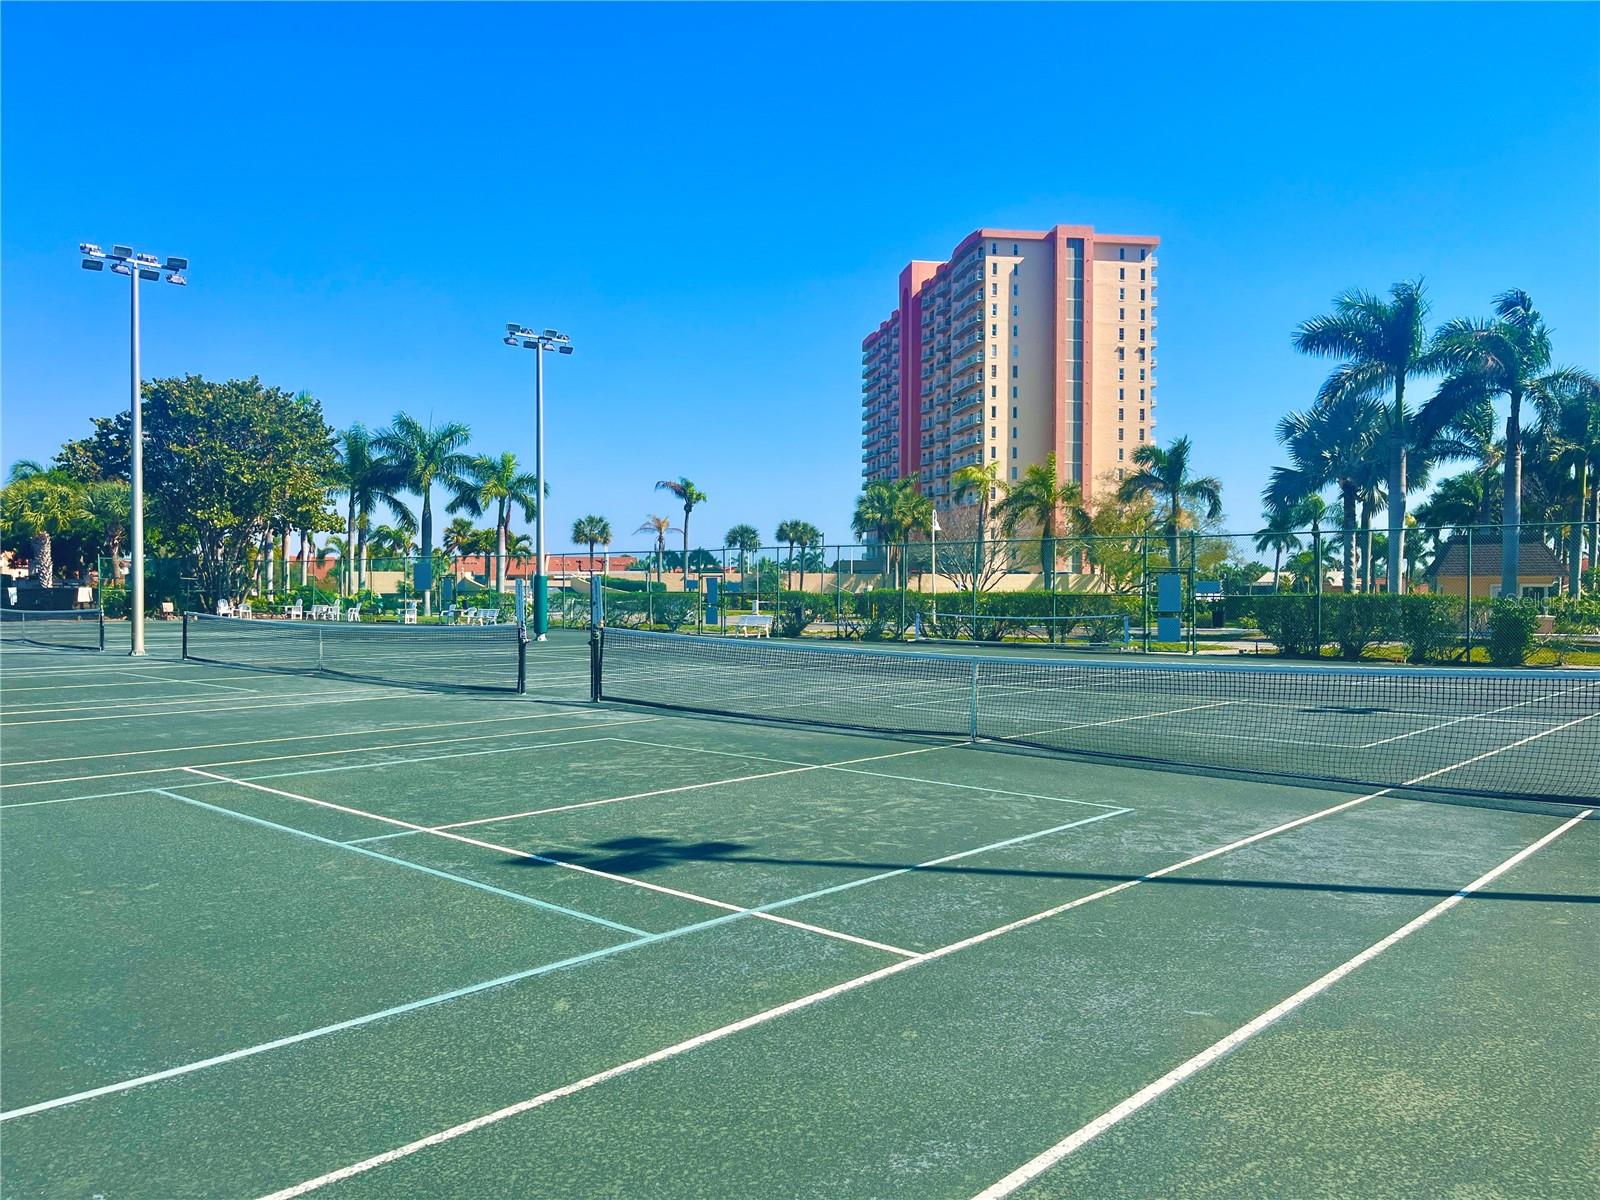 Point Brittany Tennis and Pickle Ball Courts with Building Six in the Background